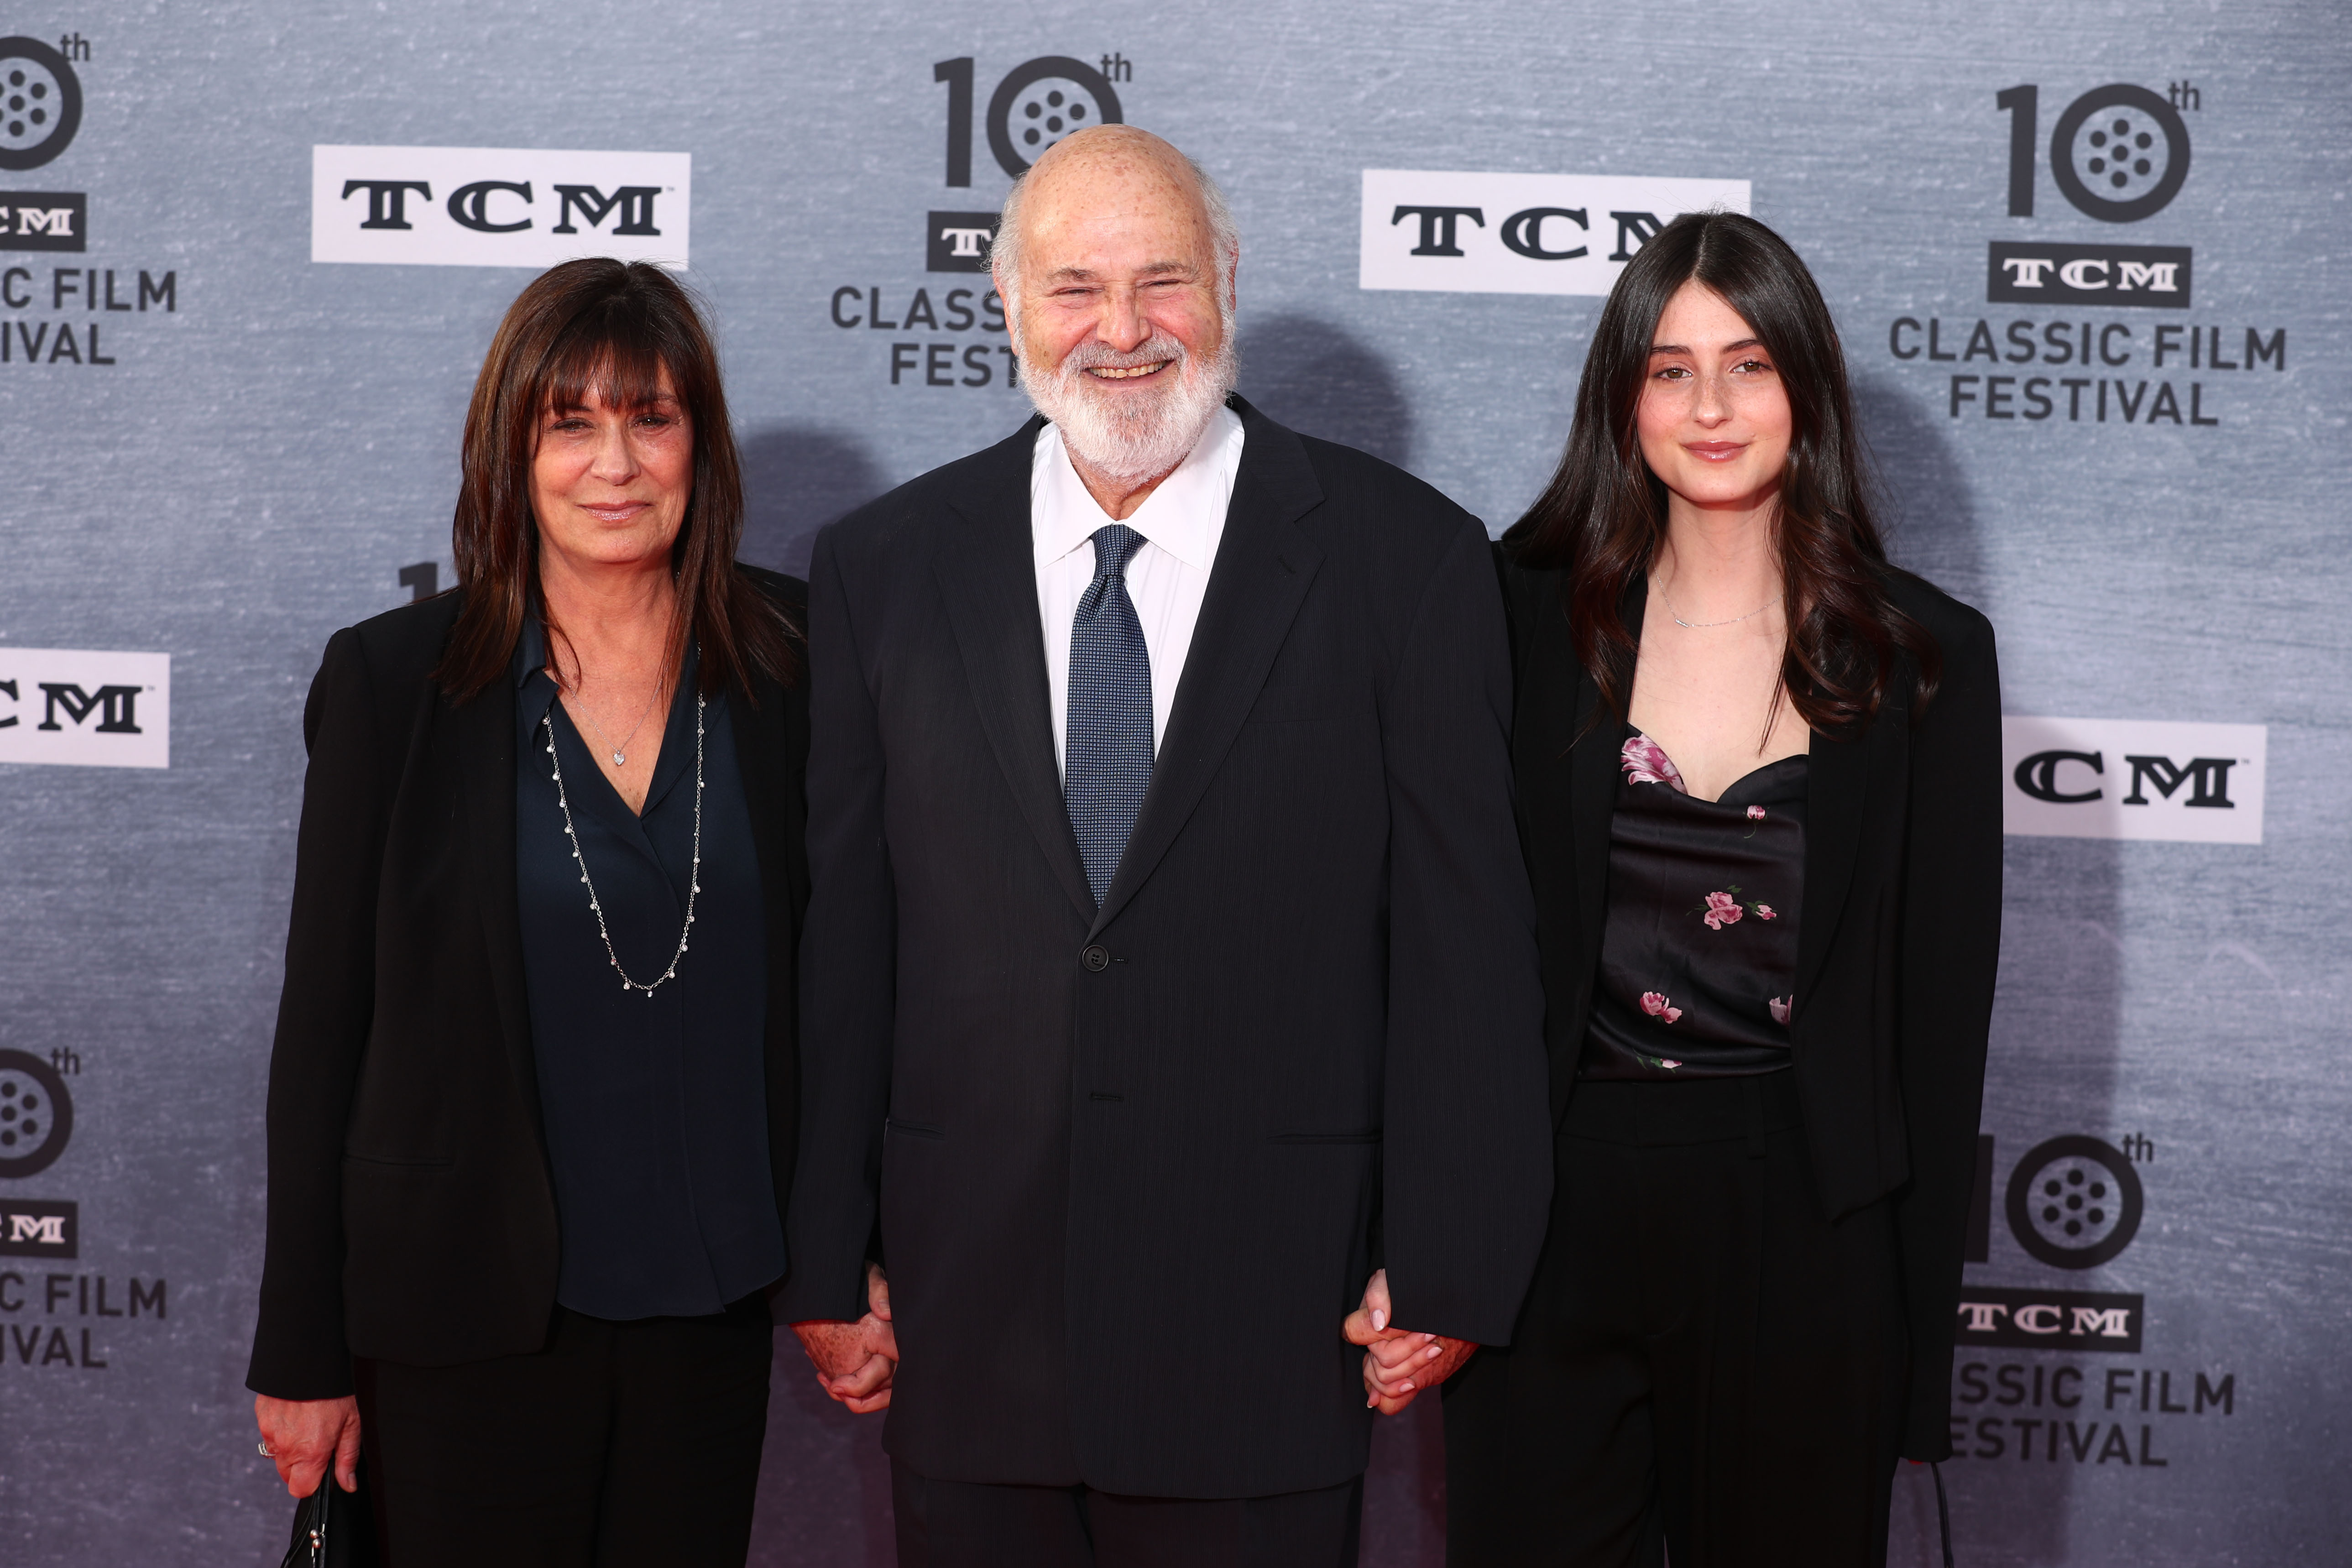 Rob Reiner, Michele Singer, and Romy Reiner on April 11, 2019 in Hollywood, California | Source: Getty Images